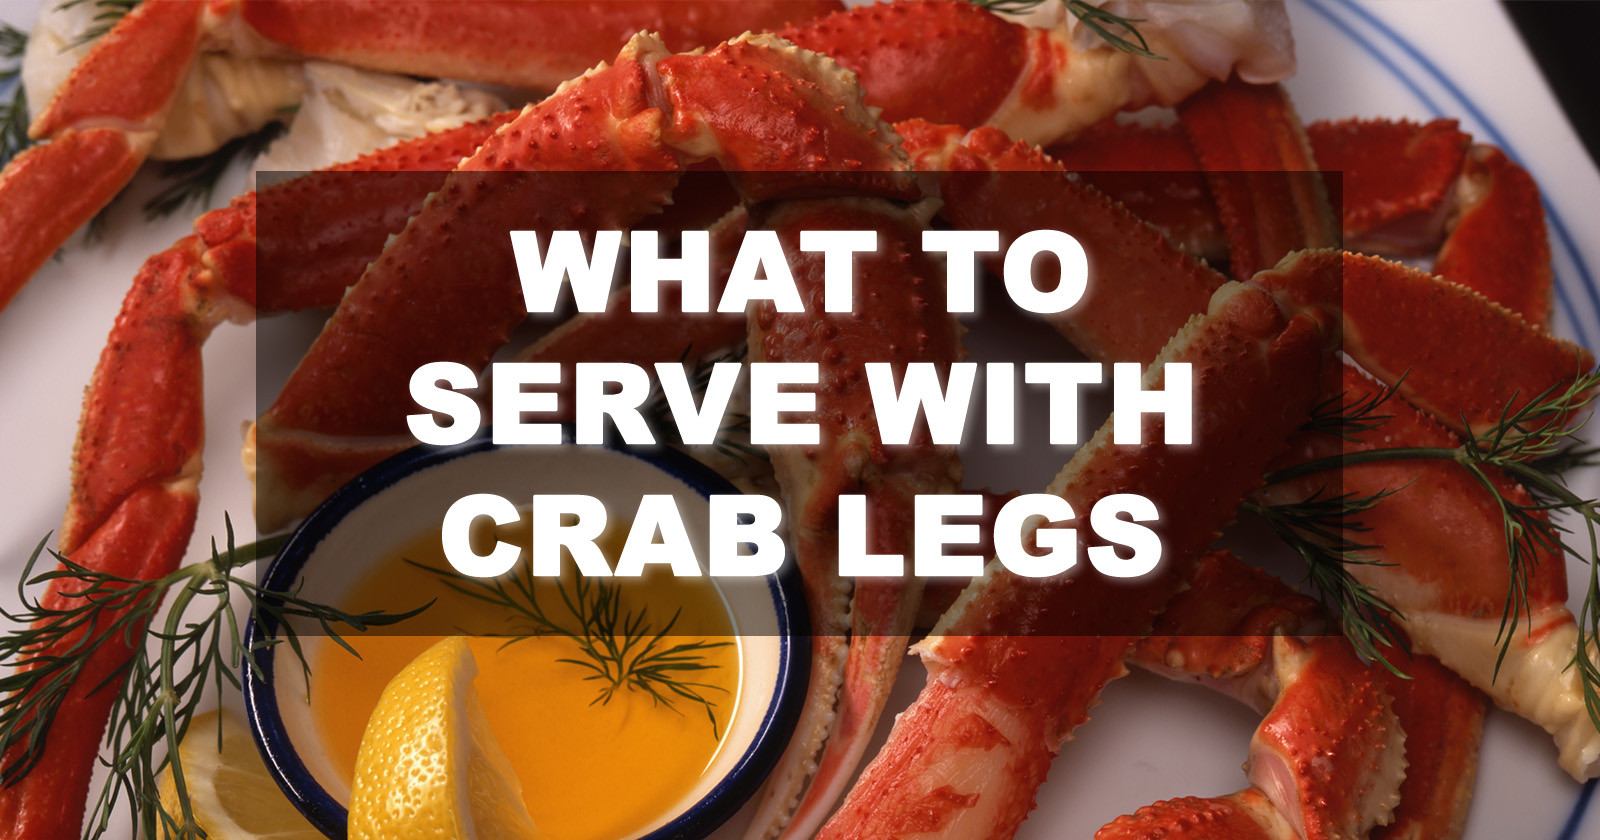 Side Dishes For Crab Legs
 Pair Your Crab Legs With These Side Dishes FamilyNano